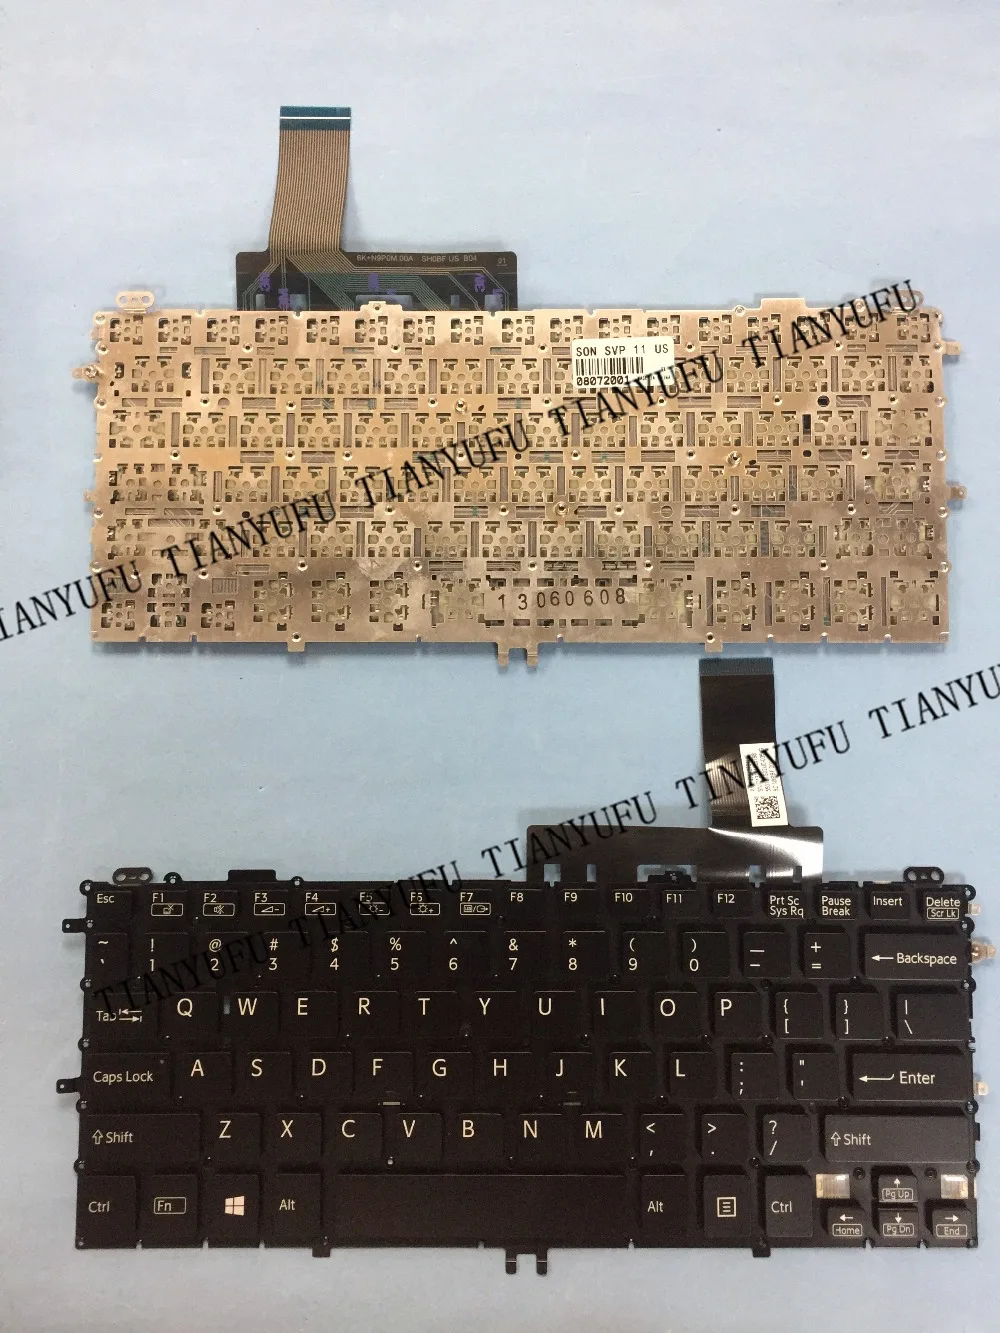 

English NEW FOR SVP11 KEYBOARD For SONY VAIO PRO 11 SVP11 SVP112A19T PRO11 SVP112 svp112a1cl SVP112 US Laptop keyboard